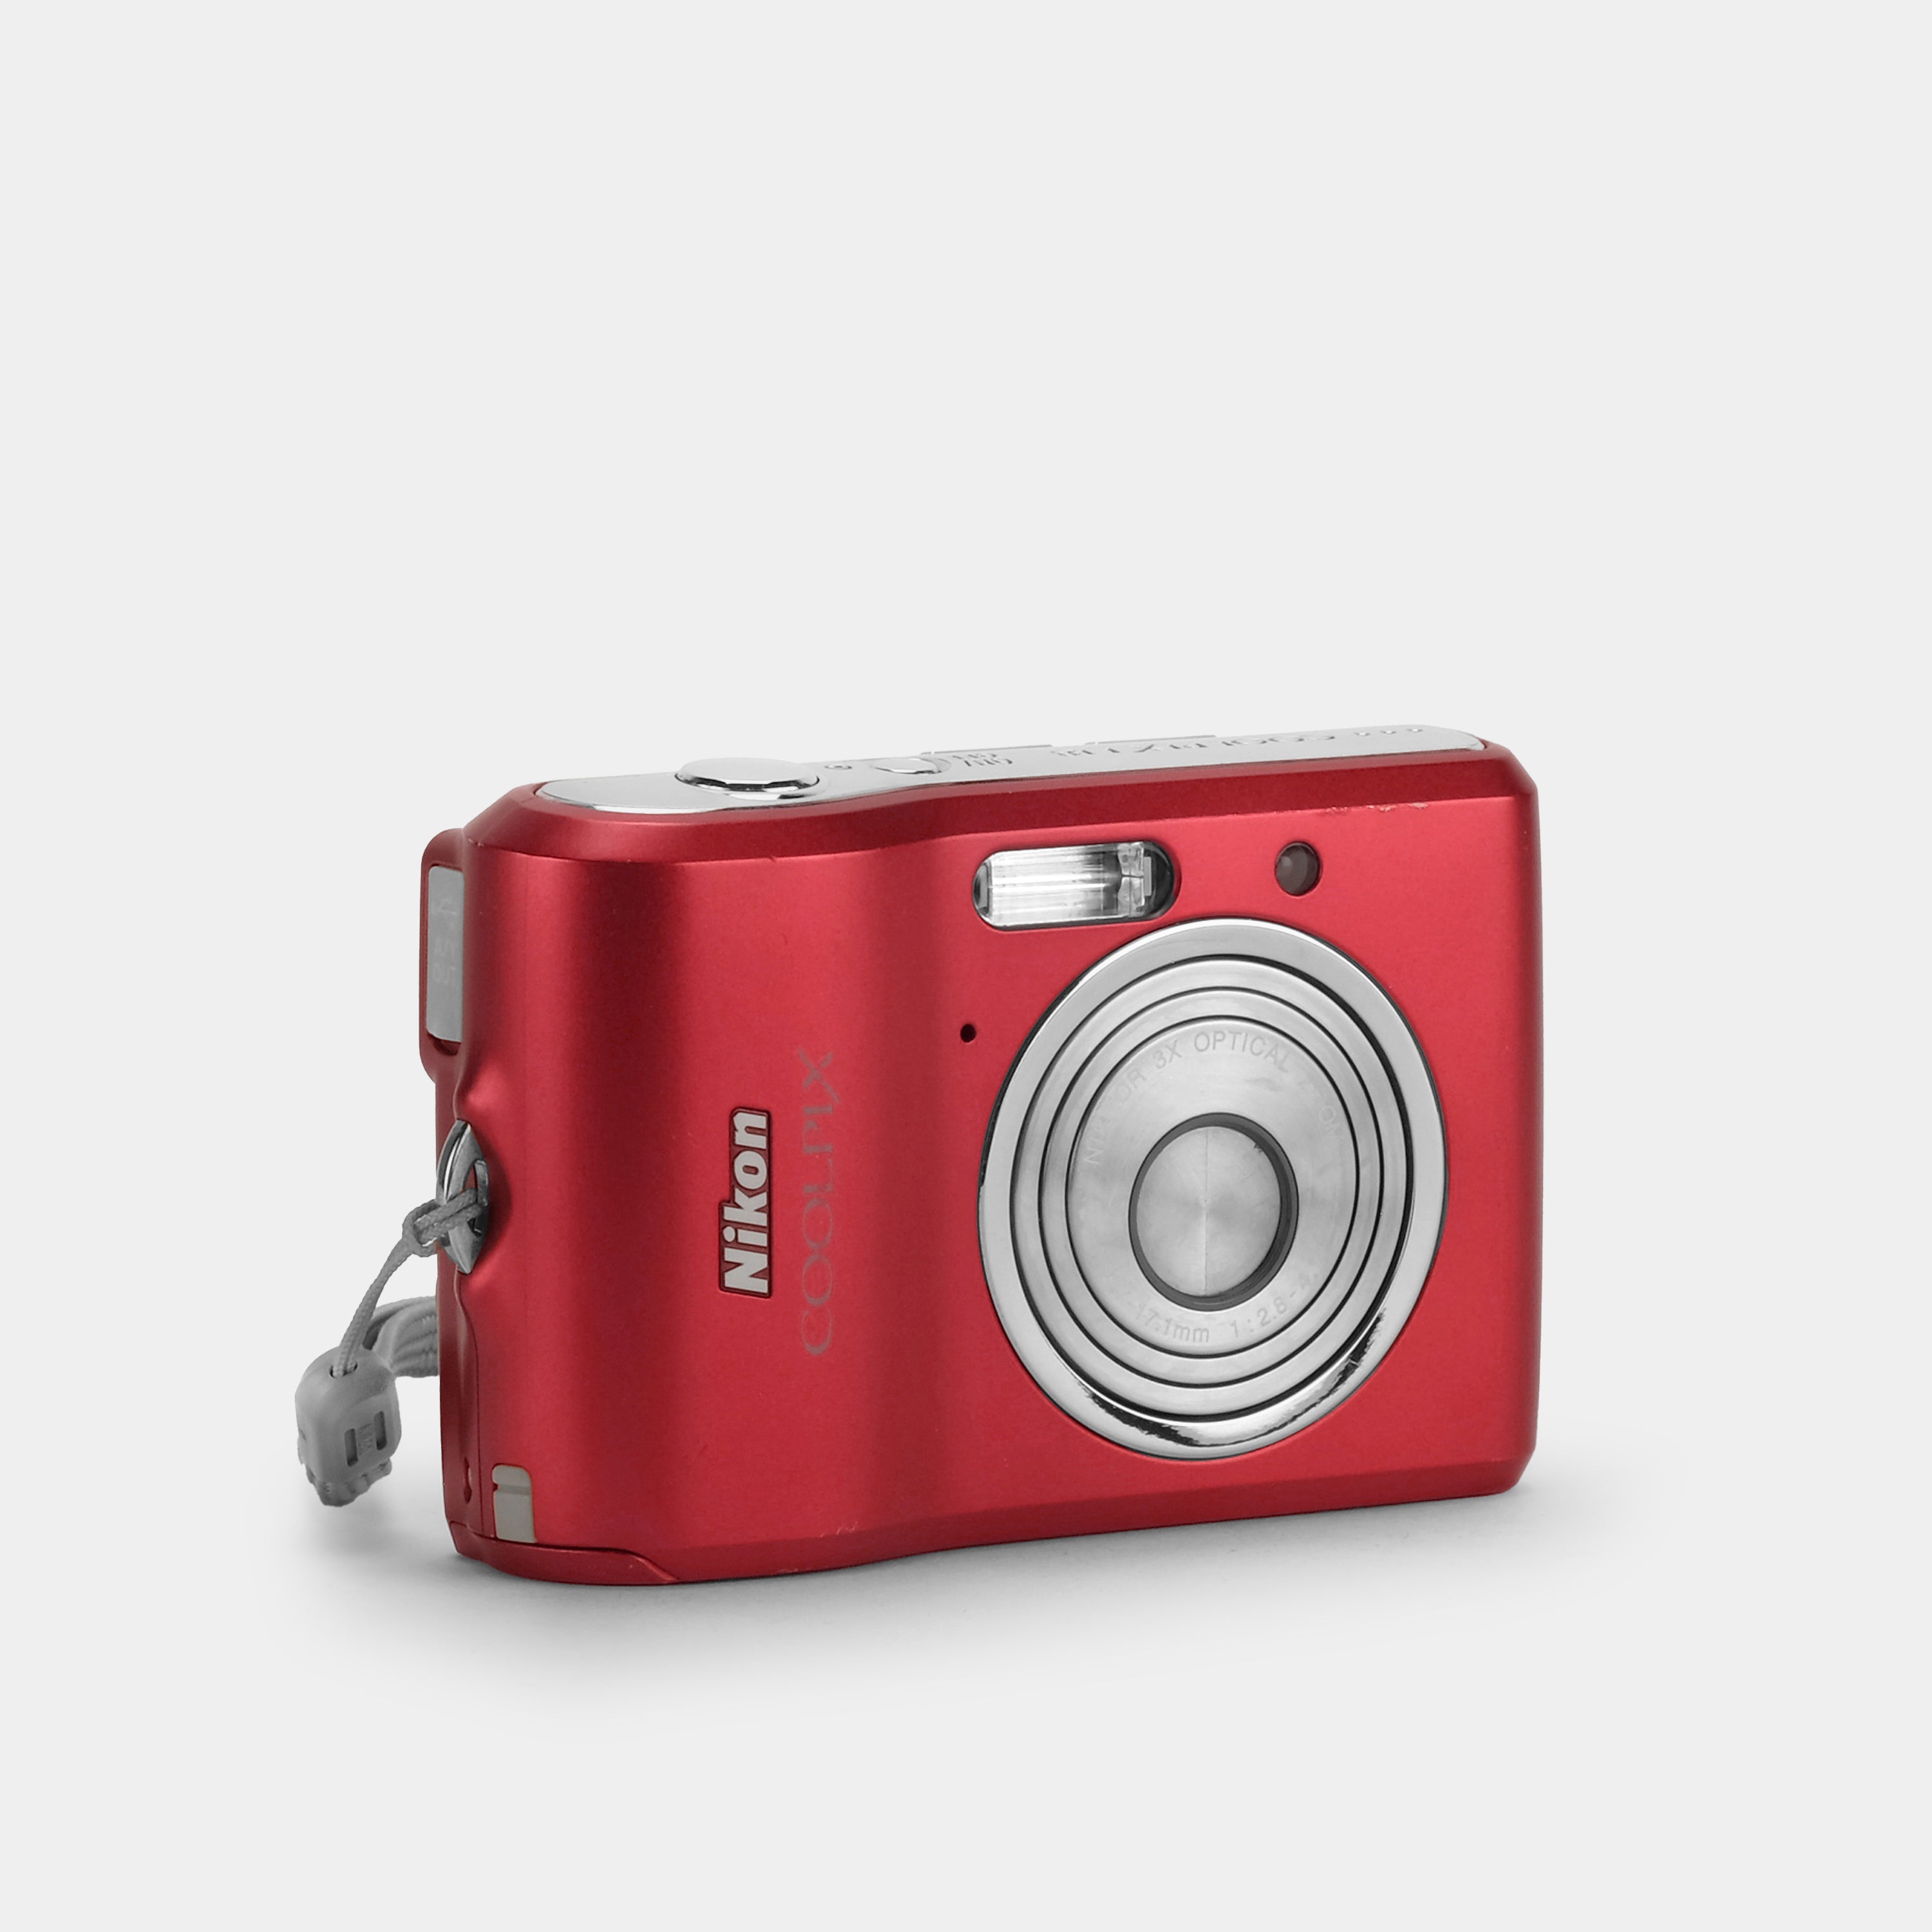 Nikon Coolpix L18 Red Point and Shoot Digital Camera